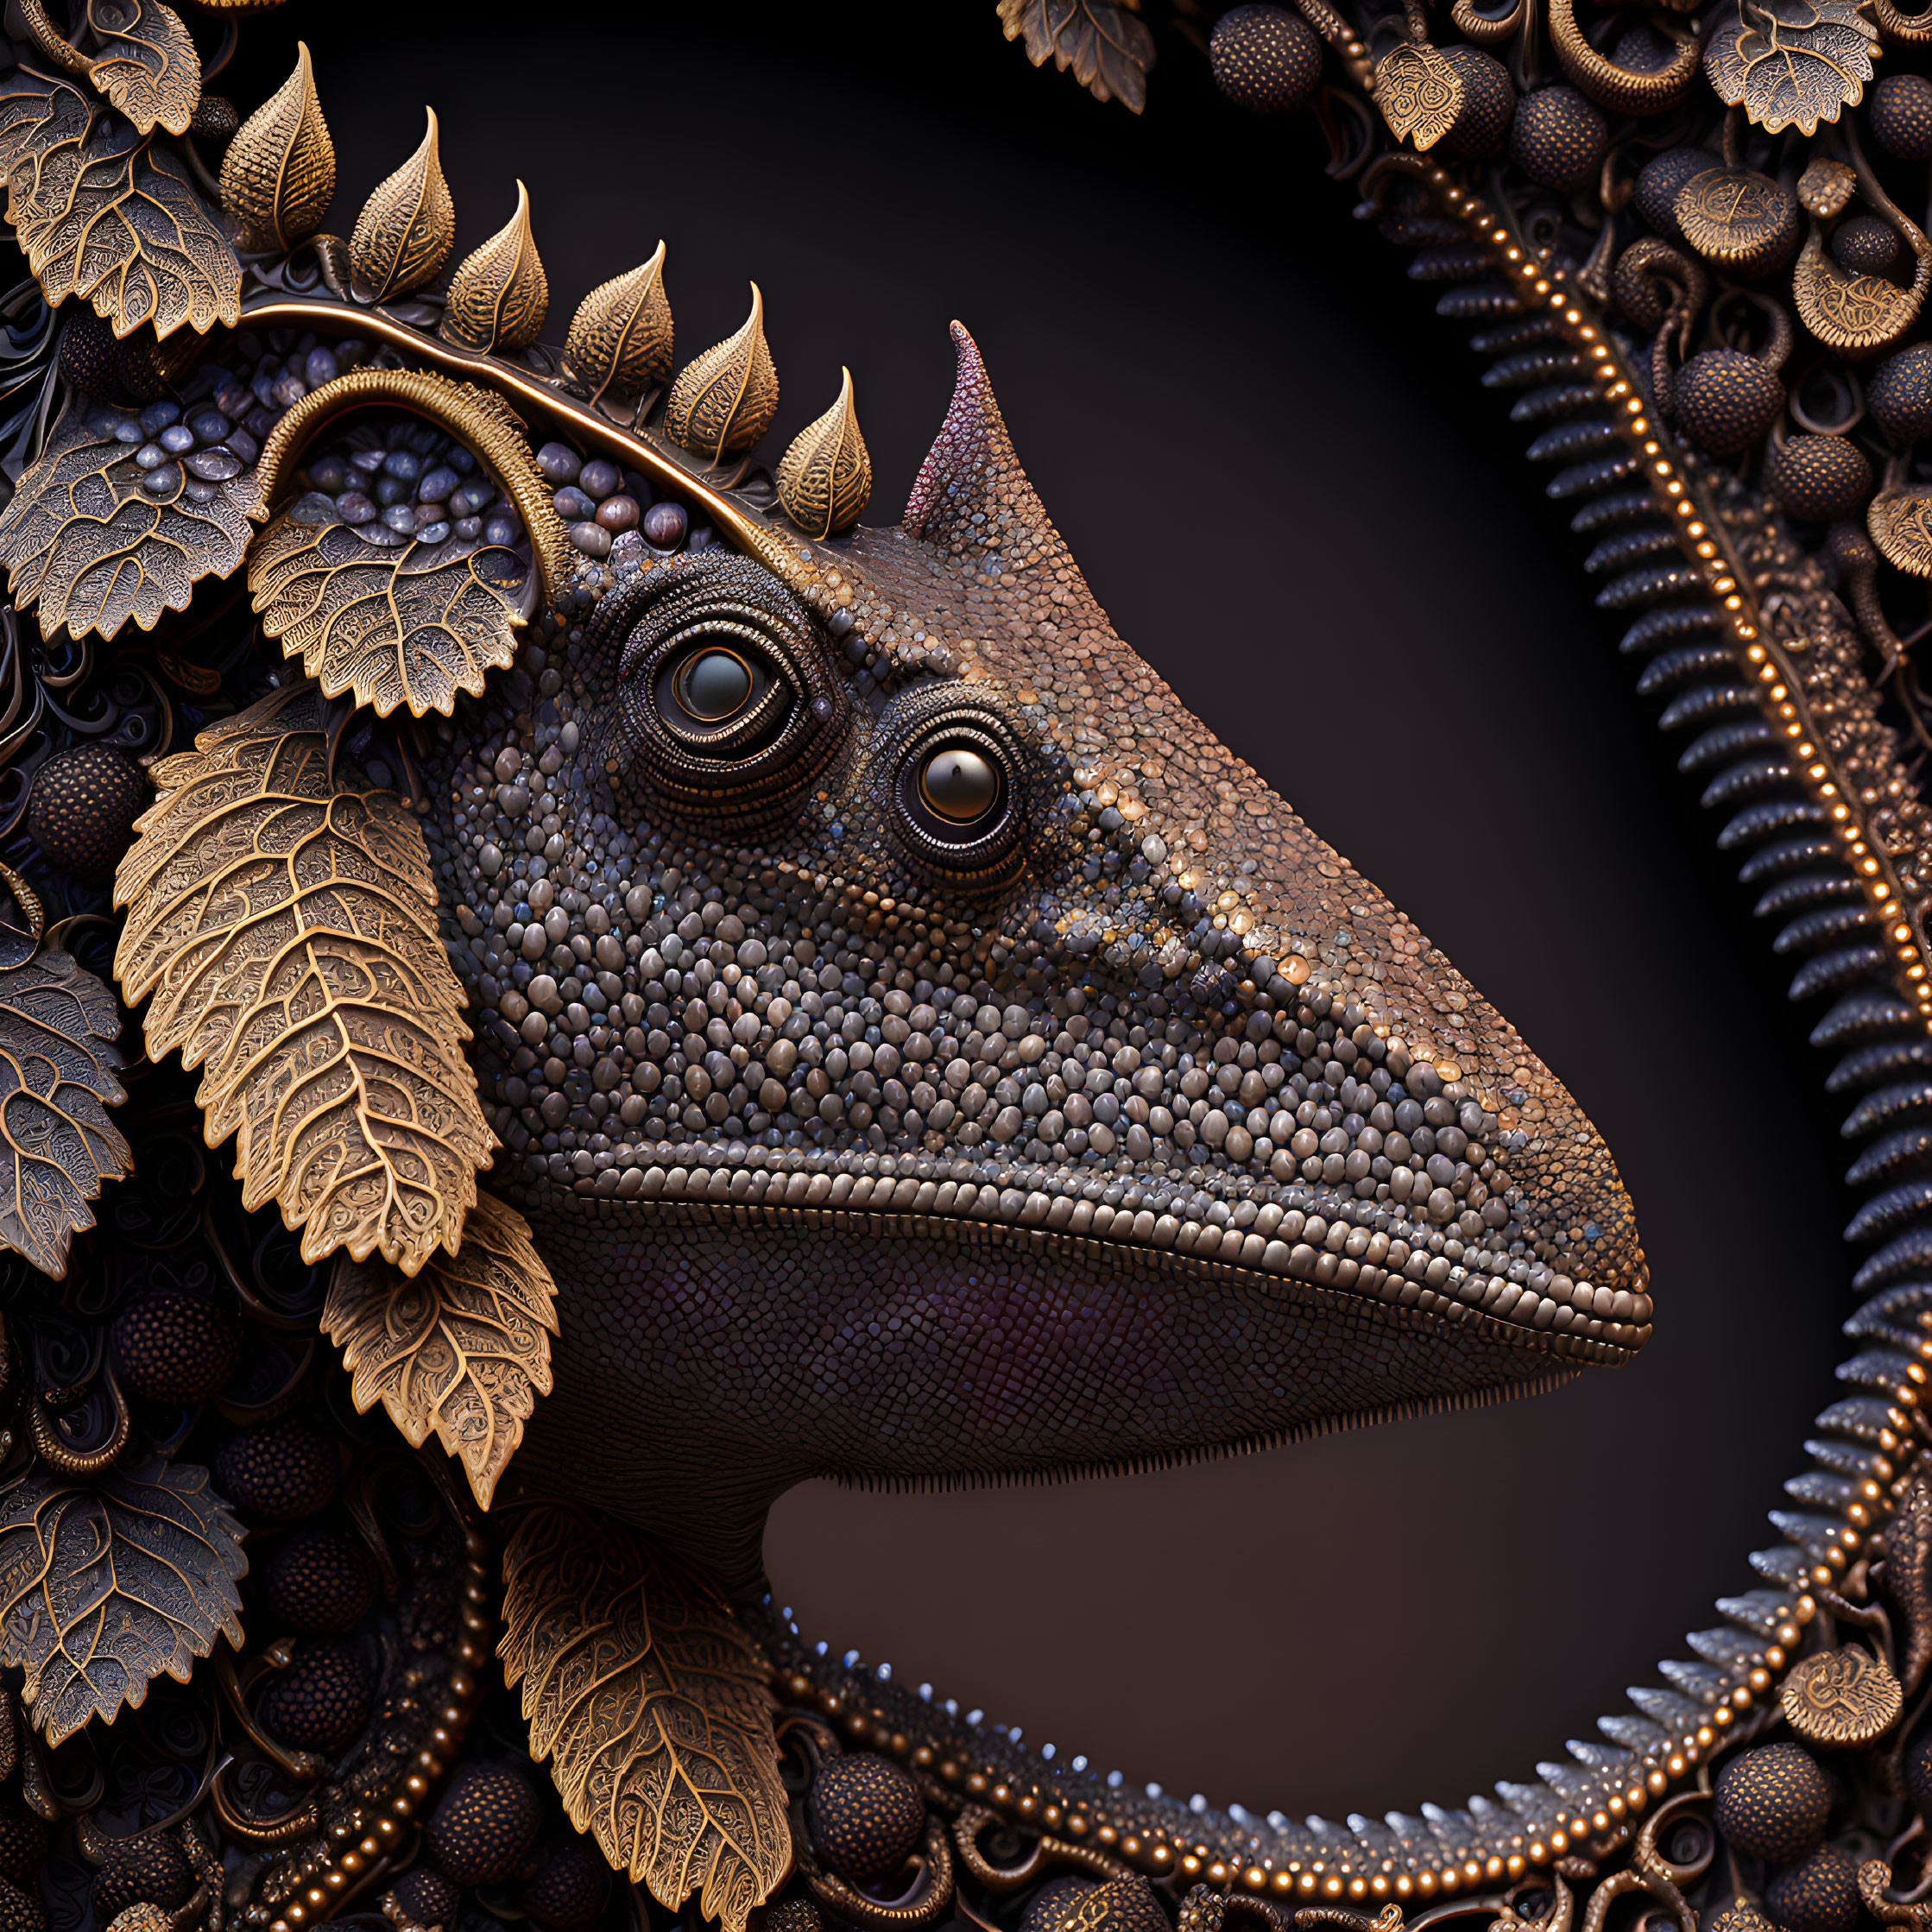 Detailed Chameleon Head Artwork with Ornate Patterns and Organic Elements